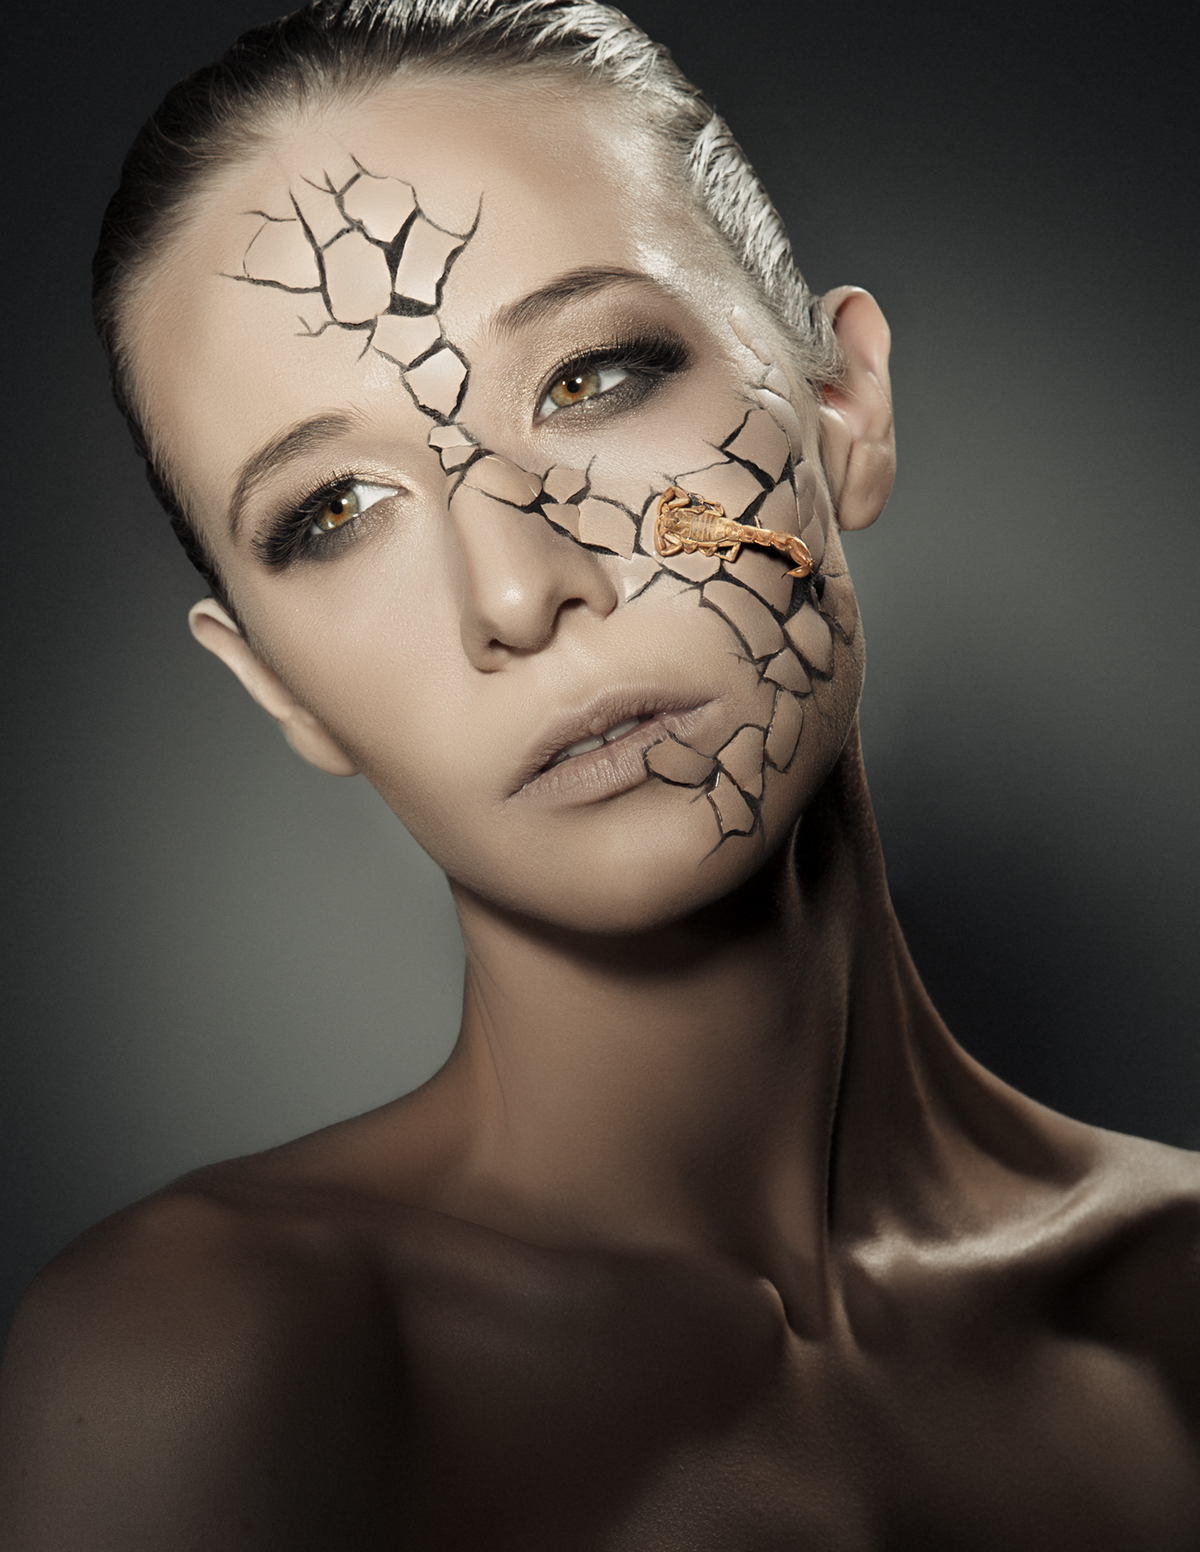 bugs bees centipede butterfly ants flying ants moths beetle scorpion bright colorful makeup beauty retouch skin